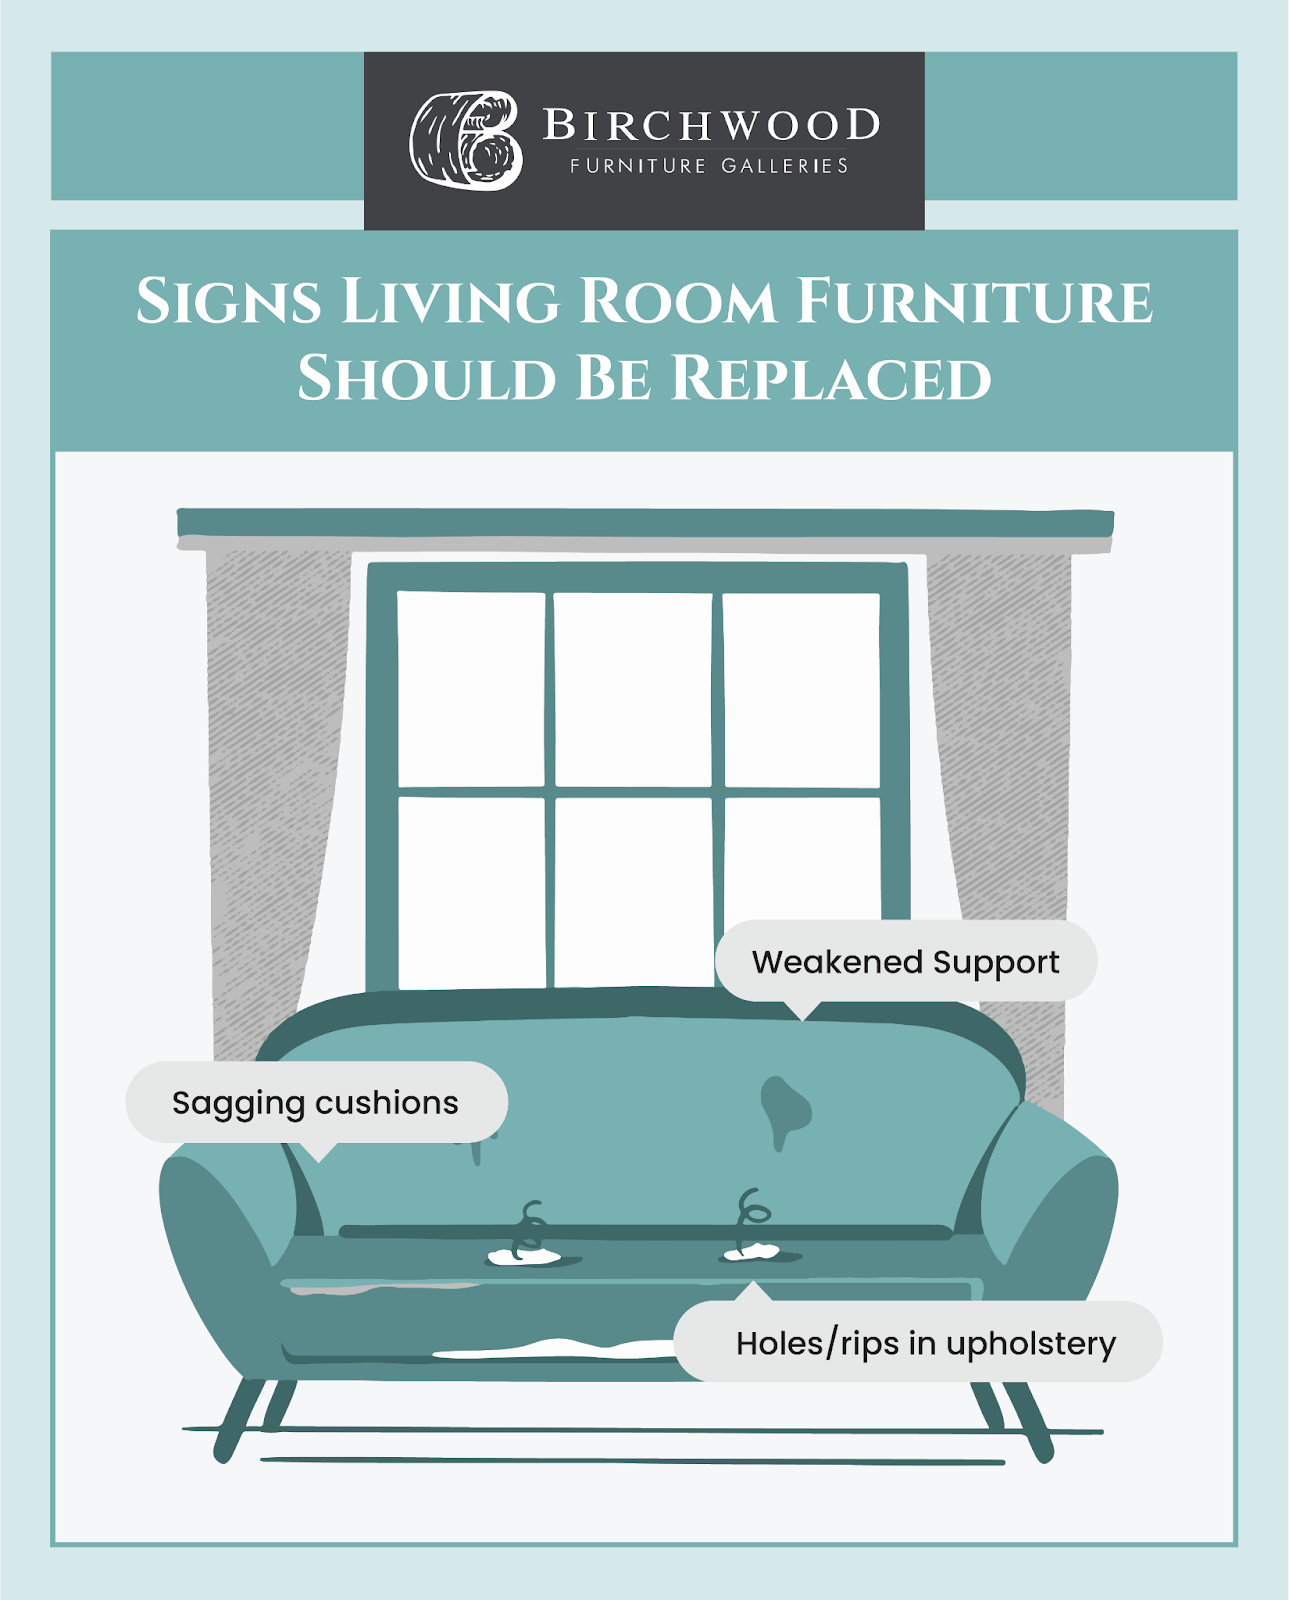 Signs living room furniture should be replaced